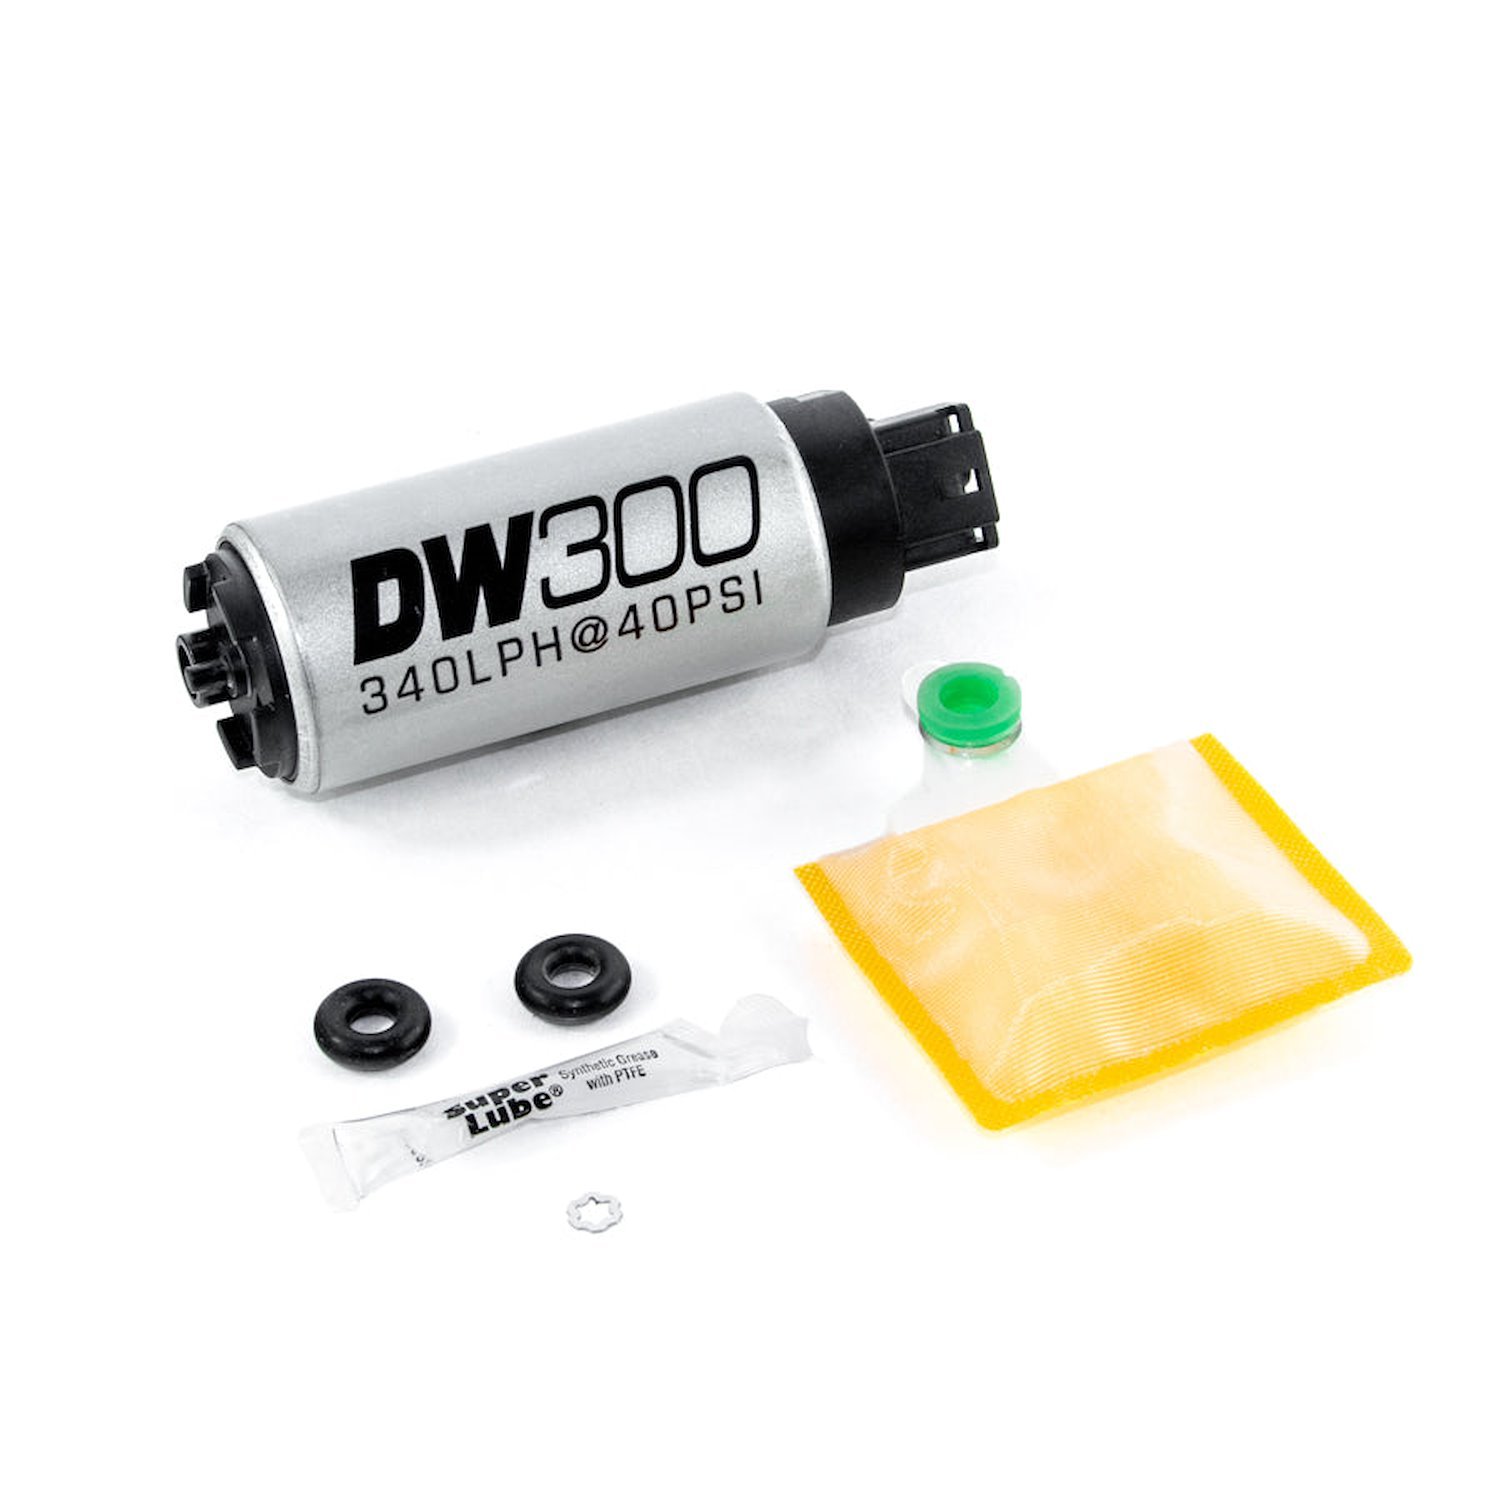 93010847 DW300 series 340lph in-tank fuel pump w/ install kit for Eclipse (turbo AWD) 95-98 and EVO 8/9 2003-2006